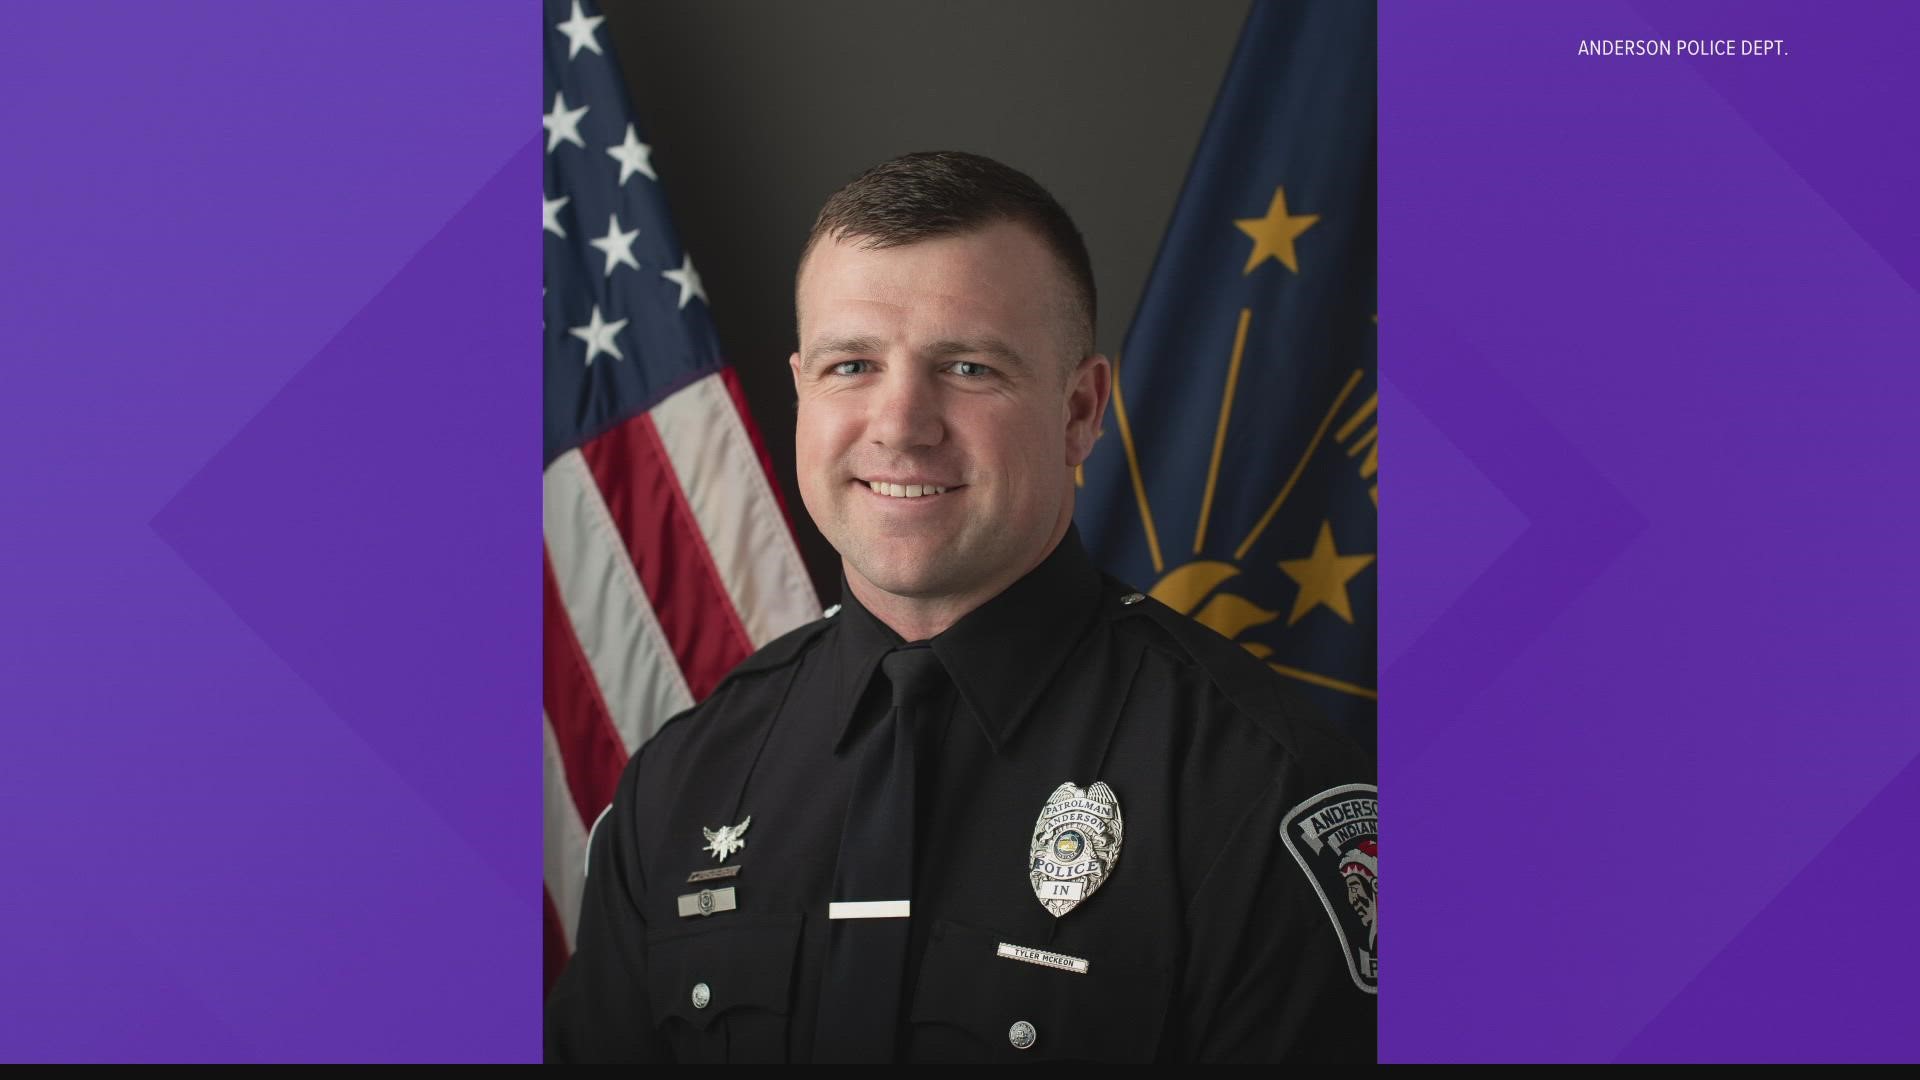 An Anderson police officer is being hailed a hero for saving a woman's life in a horrible crash.